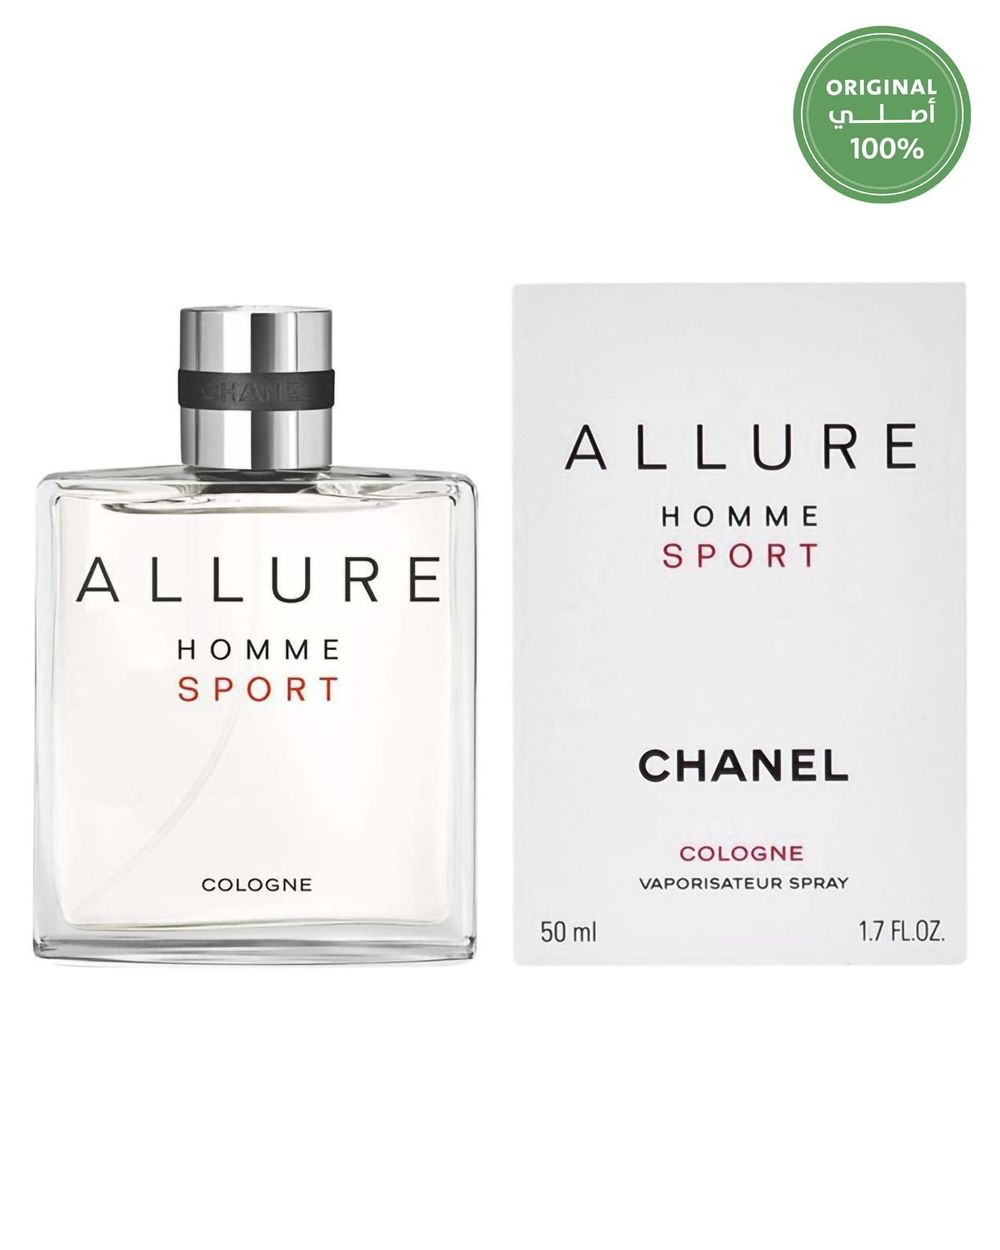 Chanel allure sport cologne. Шанель Аллюр спорт 50 мл. Chanel Allure homme Sport 50ml. Chanel Allure Sport men 50ml Cologne. Chanel Allure homme 50 мл.